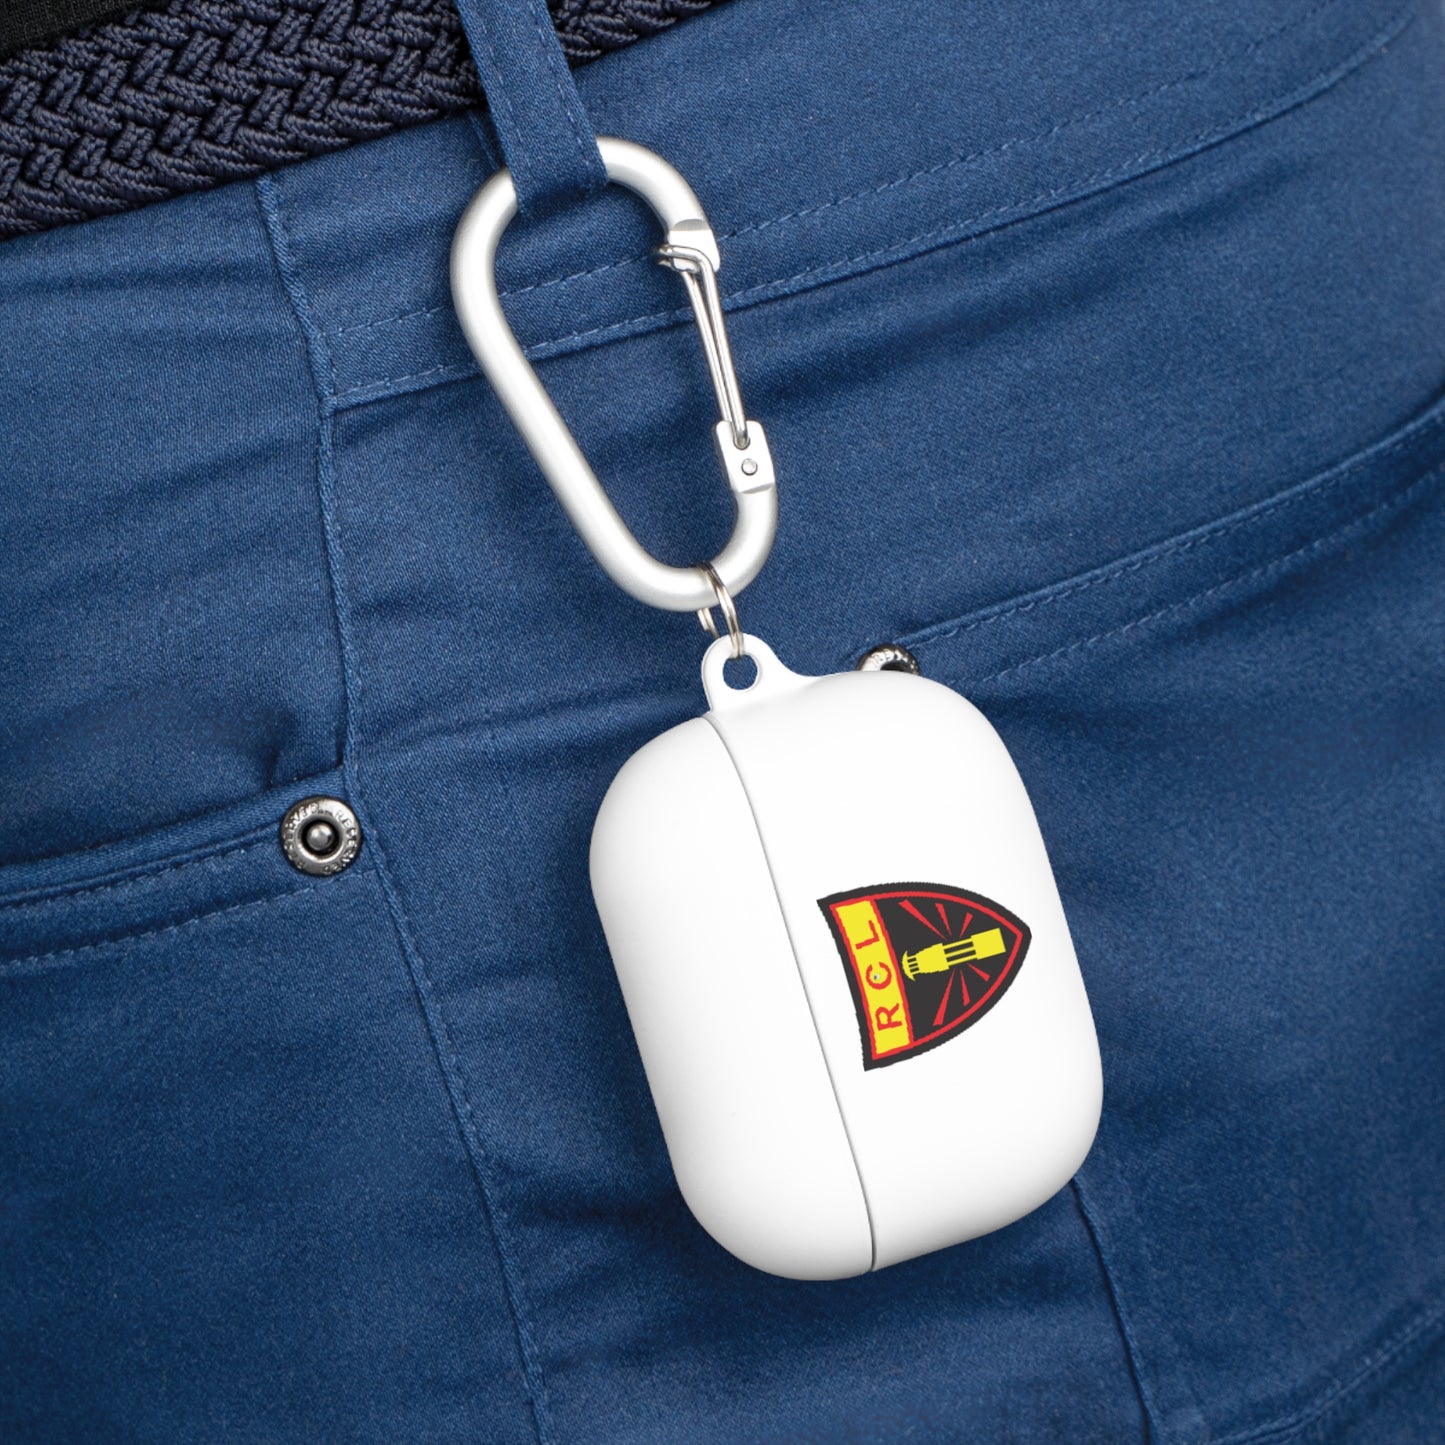 RC Lens AirPods and AirPods Pro Case Cover